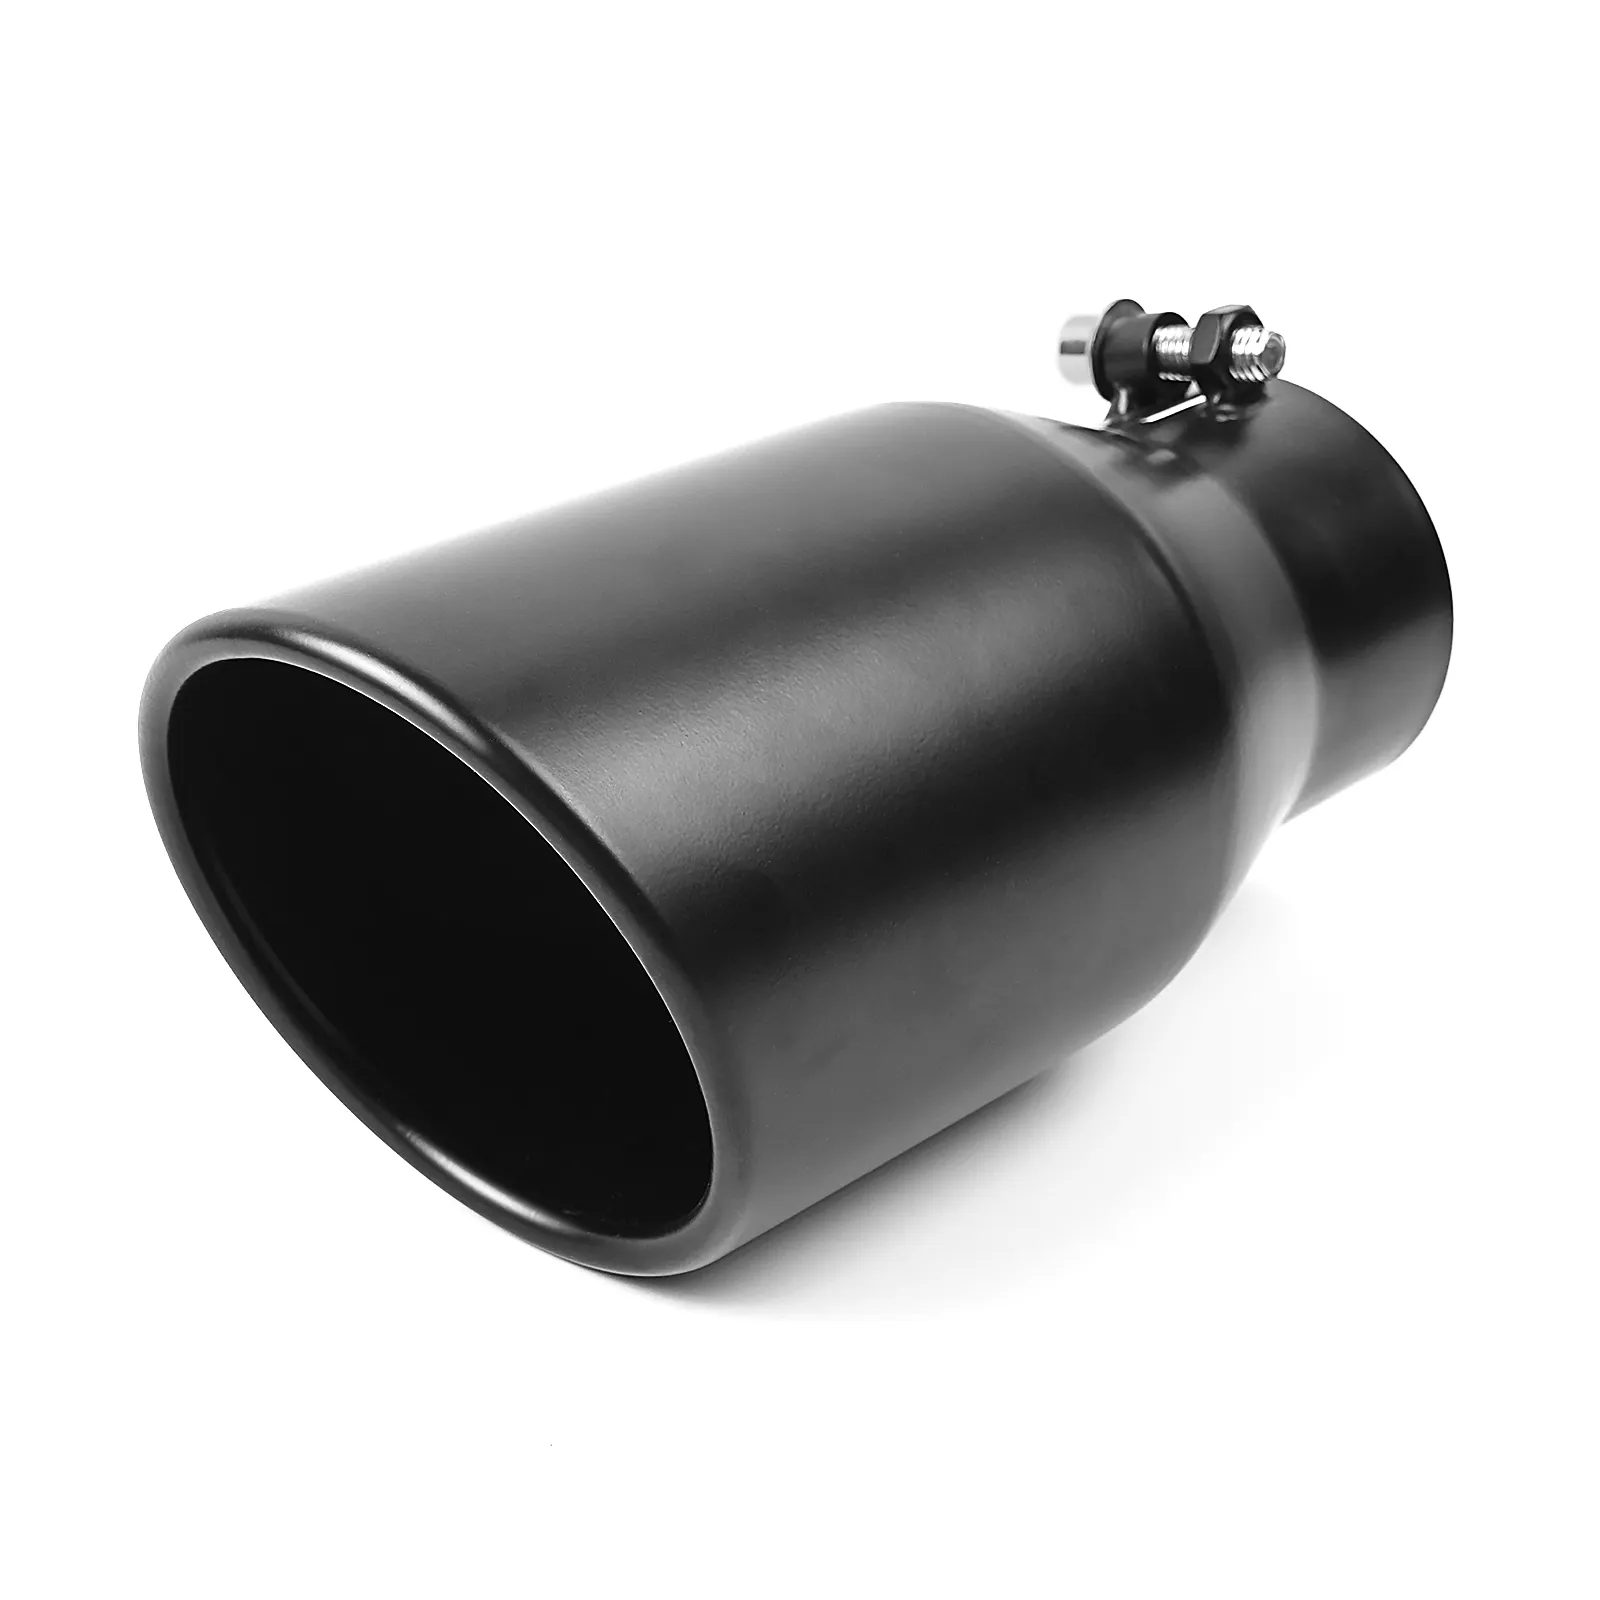 QEP001 3 Inch Inlet Exhaust Tip 3" X 4.5" X 9" Stainless Steel Tailpipe Black Paint Surface Exhaust Pipe